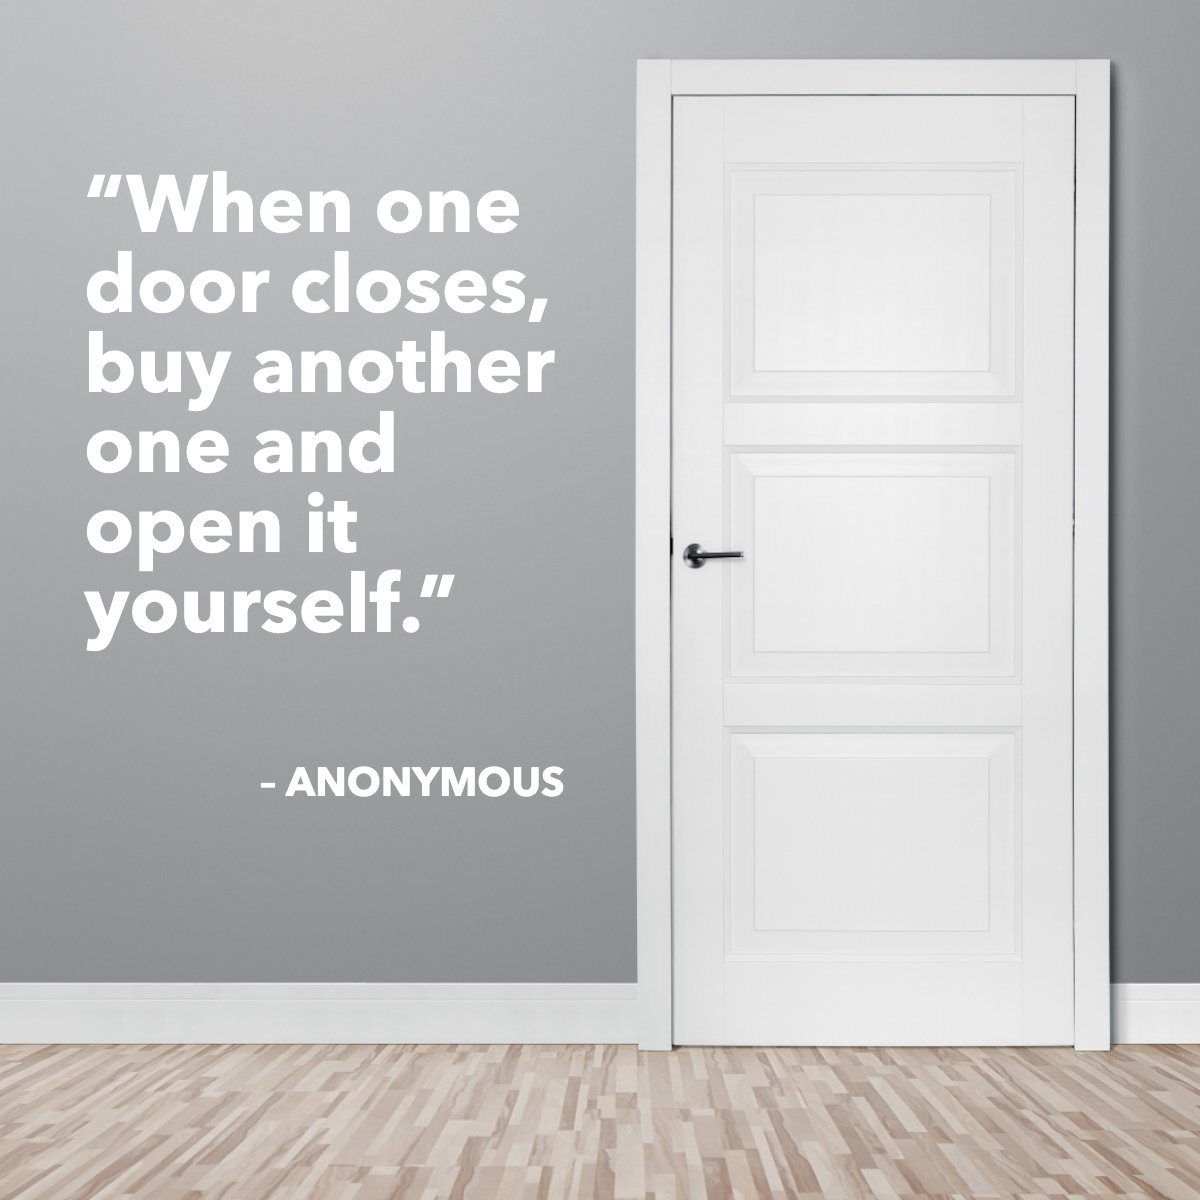 'When one door closes, buy another one and open it yourself.' 
– Anonymous

What doors are you opening up for yourself? Let us know in the comments!

#quote #door #whitedoor #interior #opportunities #opportunity #inspirational
 #dreamhome #homeowner #goals #homegoals